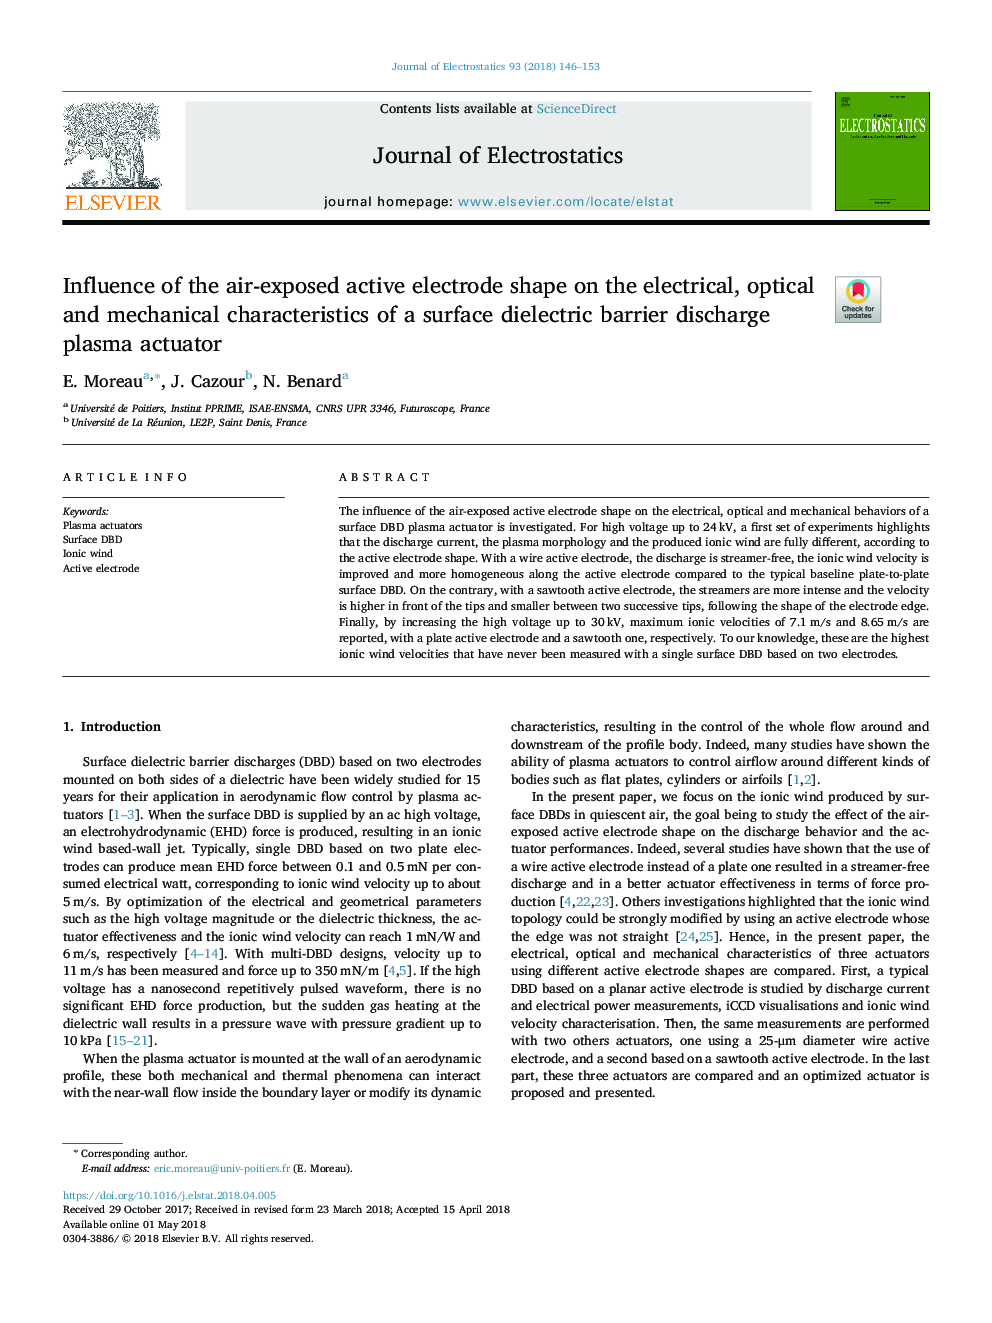 Influence of the air-exposed active electrode shape on the electrical, optical and mechanical characteristics of a surface dielectric barrier discharge plasma actuator